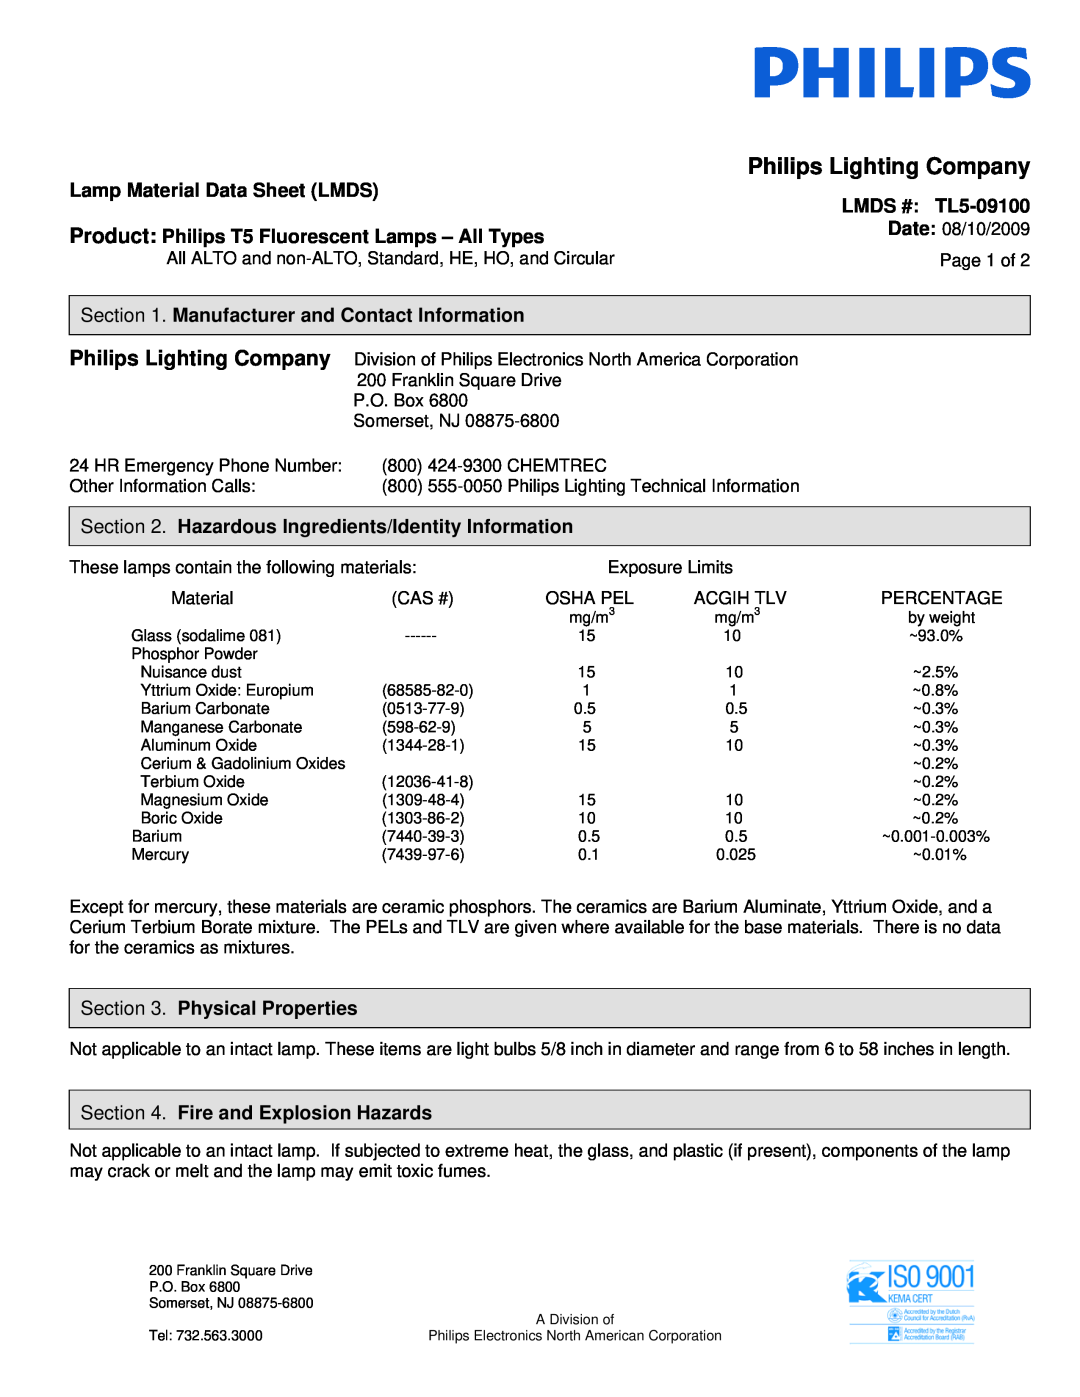 Philips manual Lamp Material Data Sheet LMDS, LMDS # TL5-09100, Product Philips T5 Fluorescent Lamps - All Types 